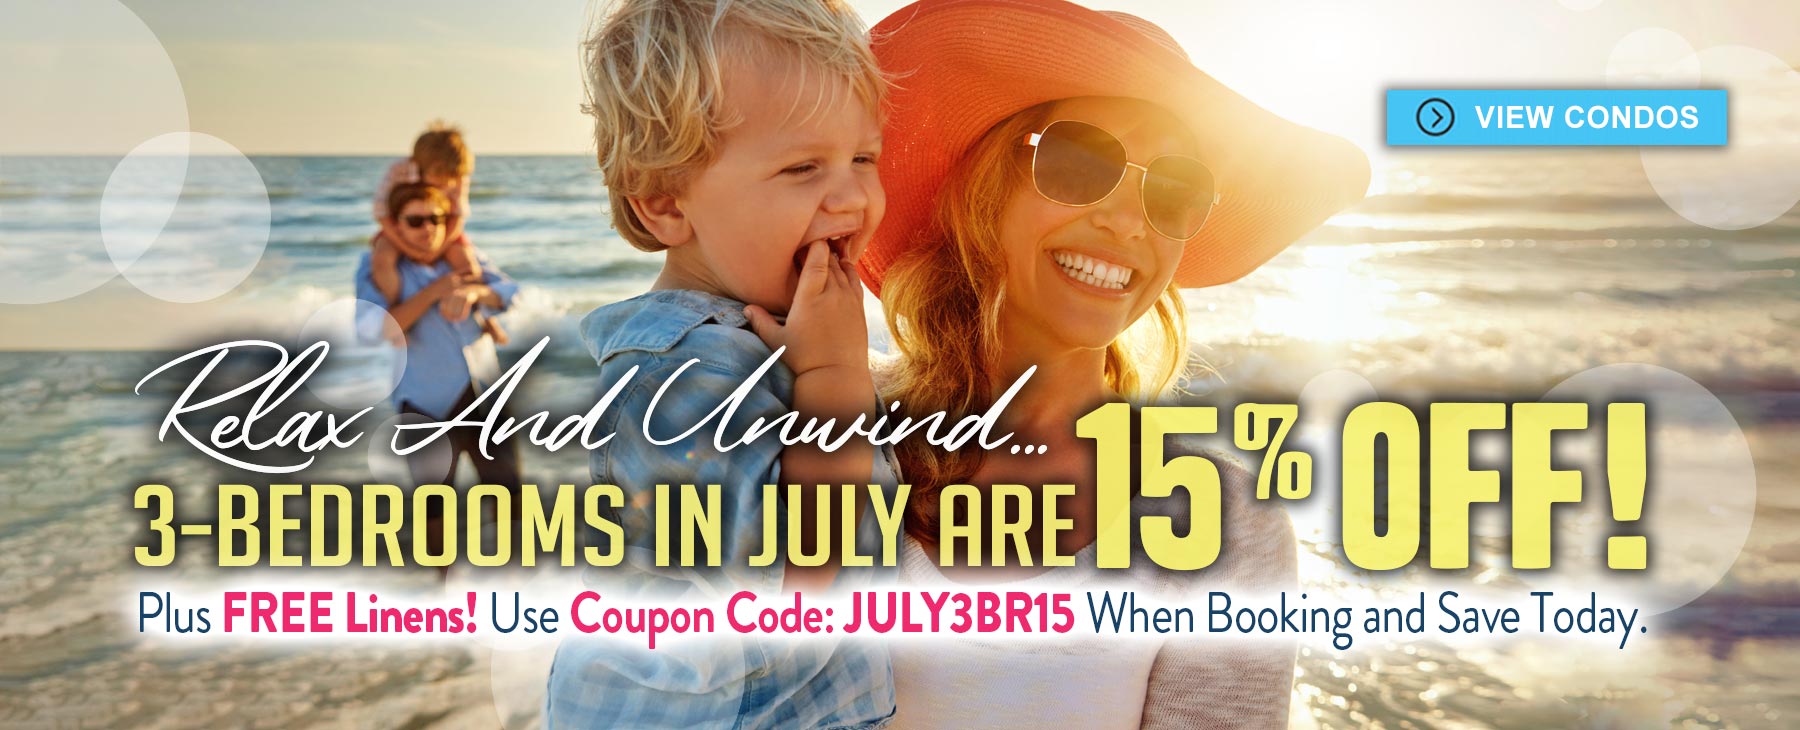 Enjoy 15% off all 3-bedroom units in July!